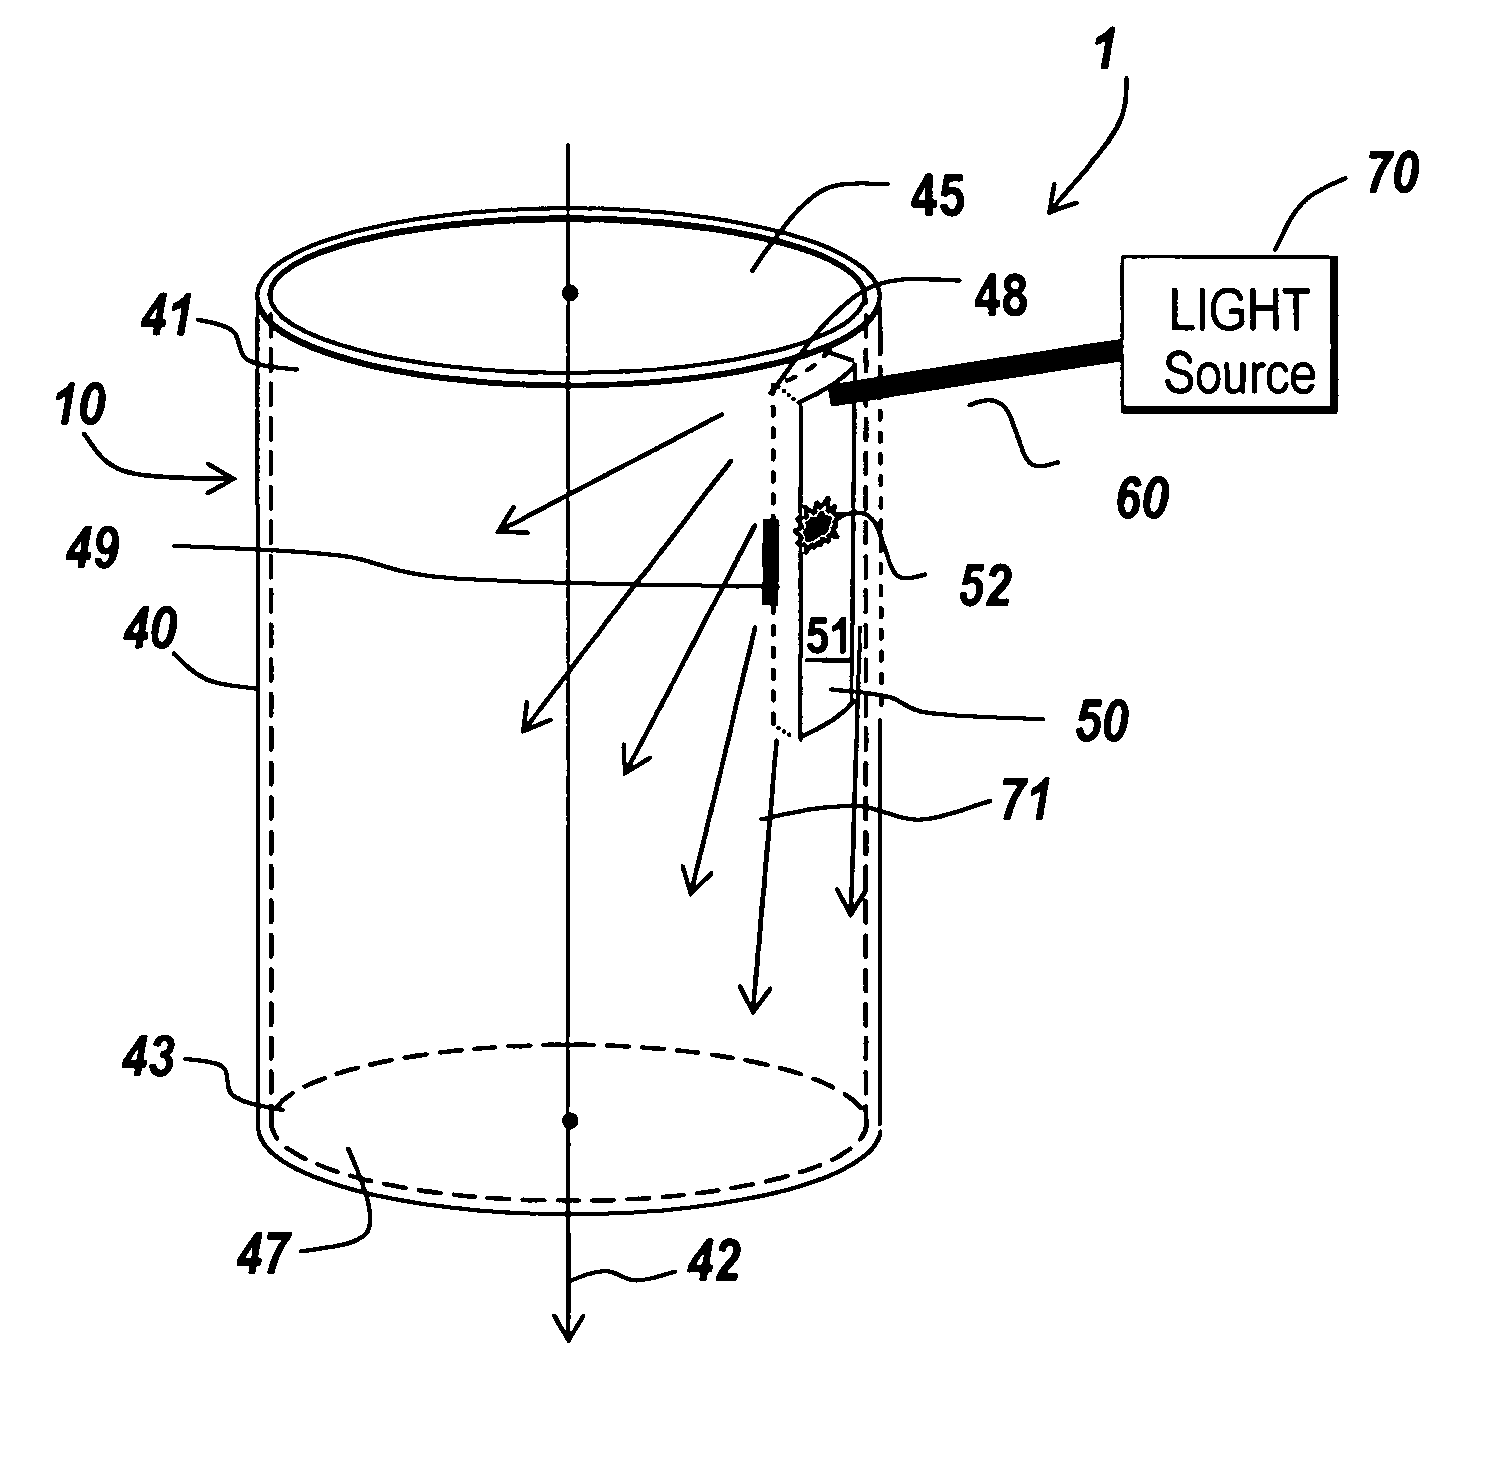 Illuminated surgical access system including a surgical access device and coupled light emitter